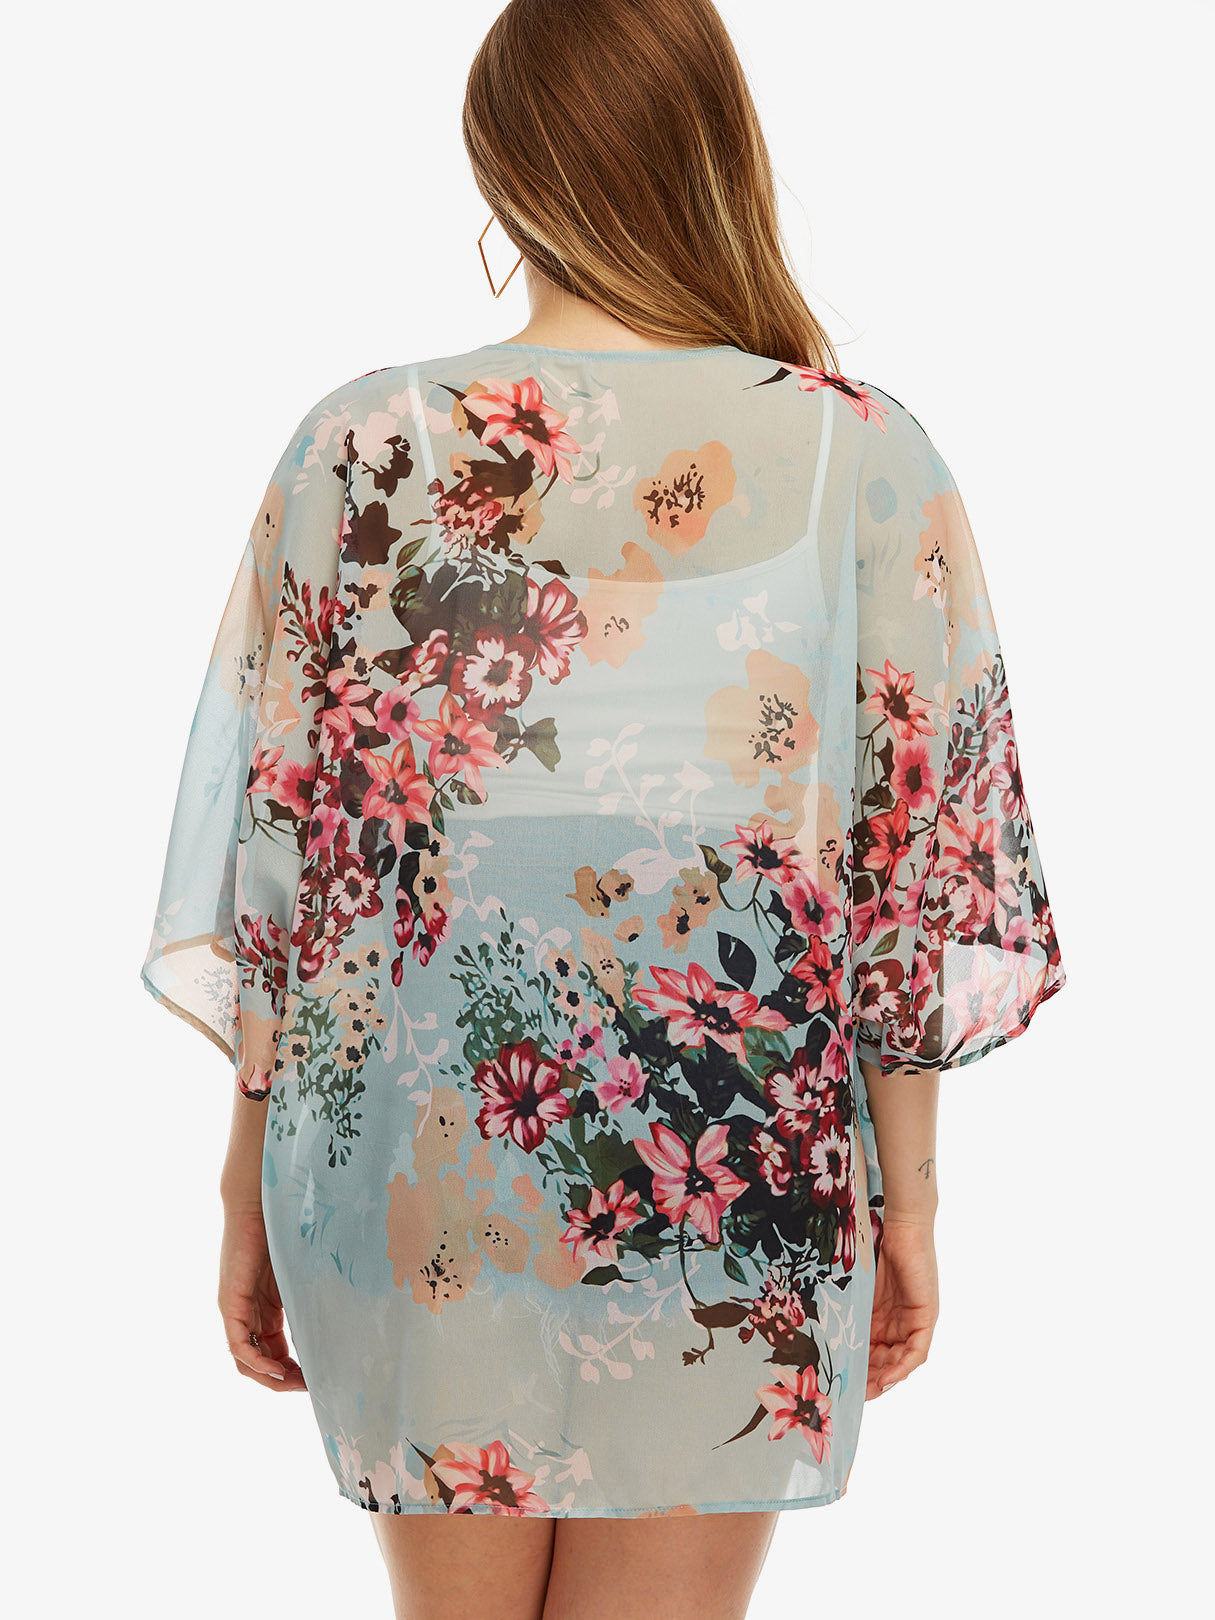 NEW FEELING Womens Floral Plus Size Tops